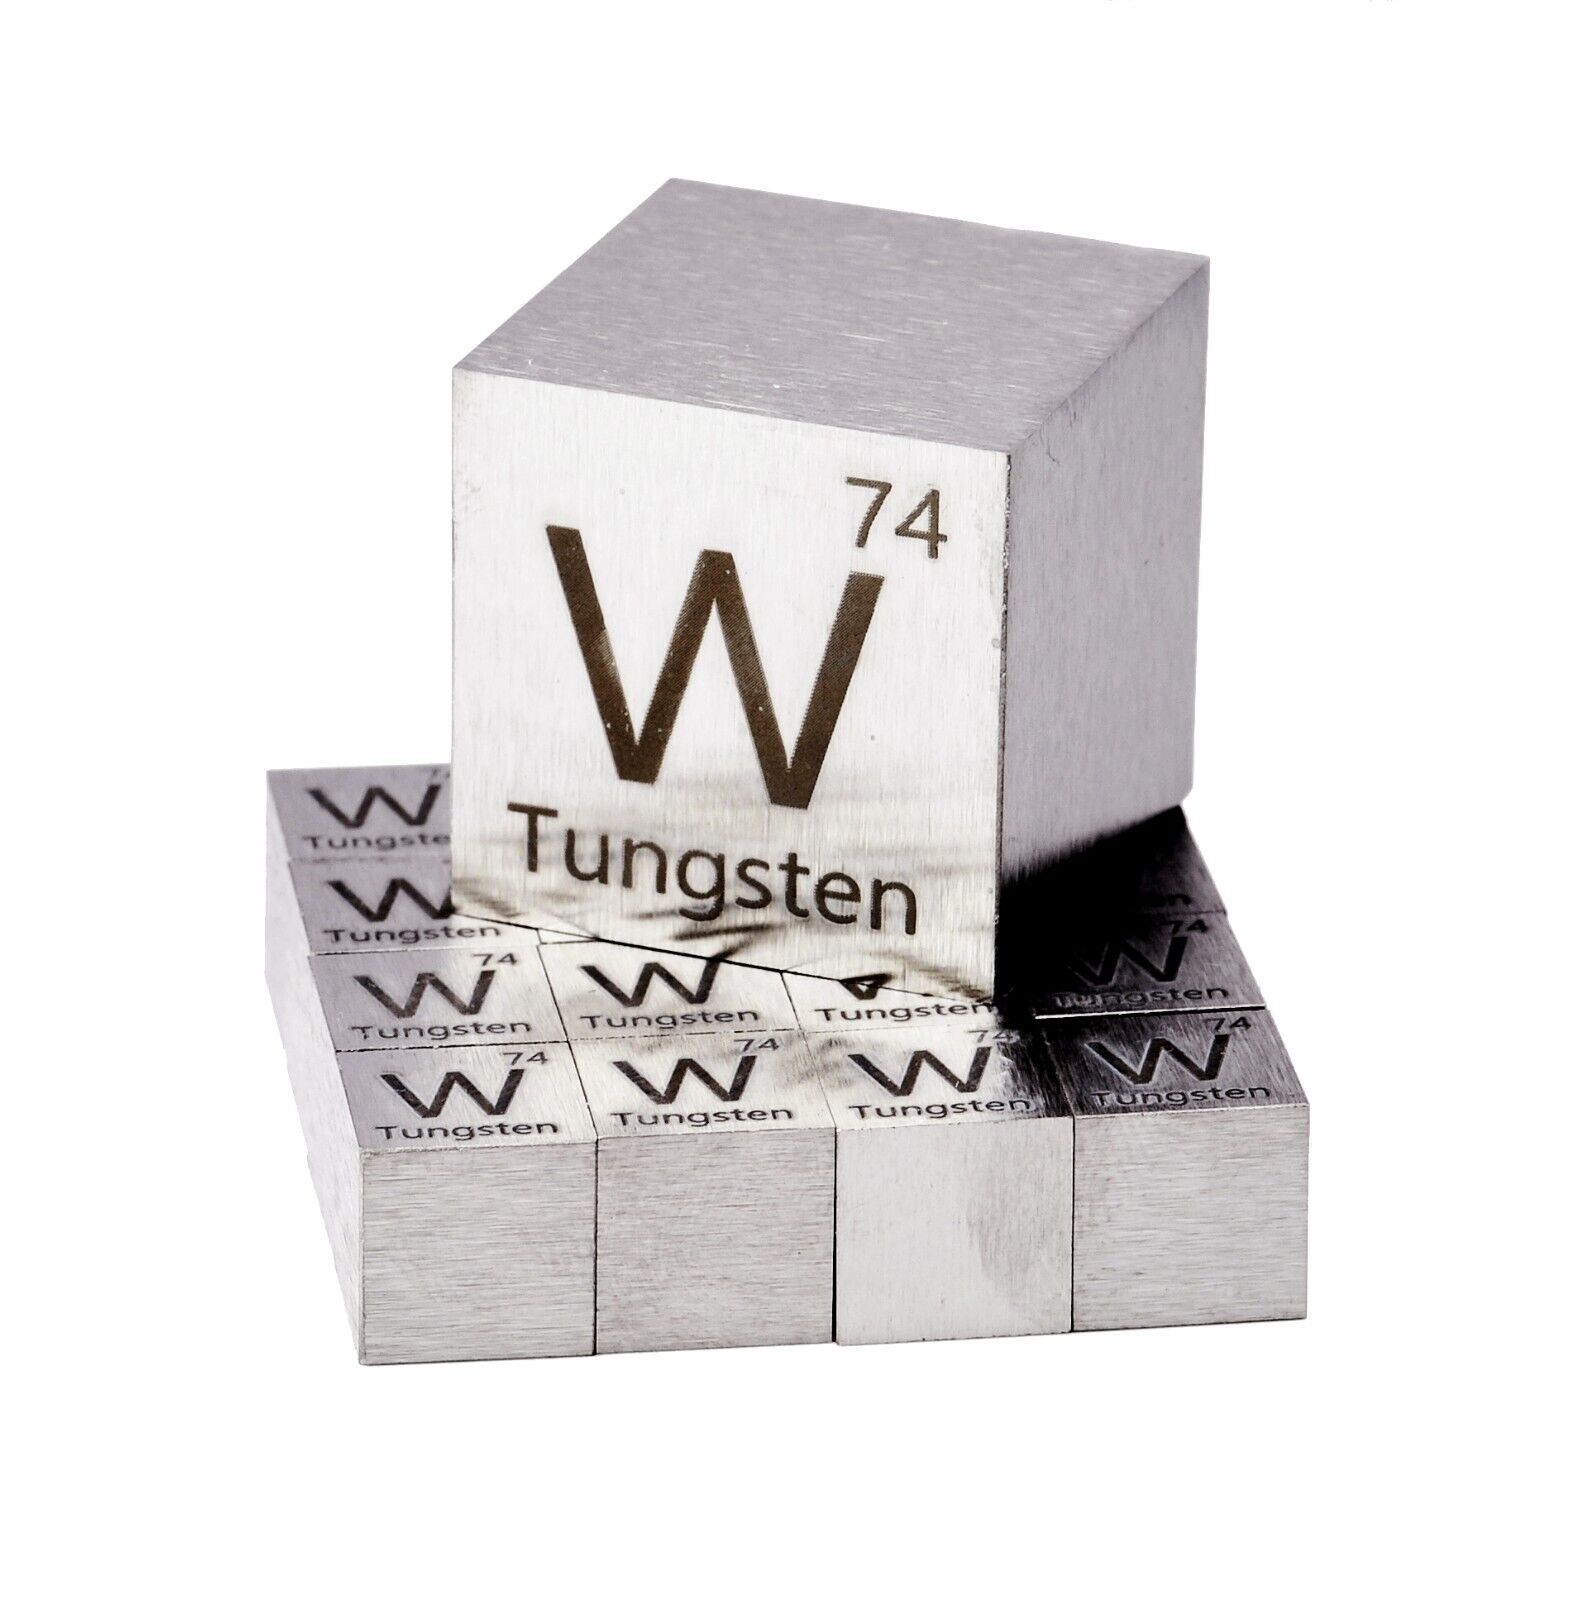 Tungsten Metal 10mm Density Cube 99.95% for Element Collection USA SHIPPING